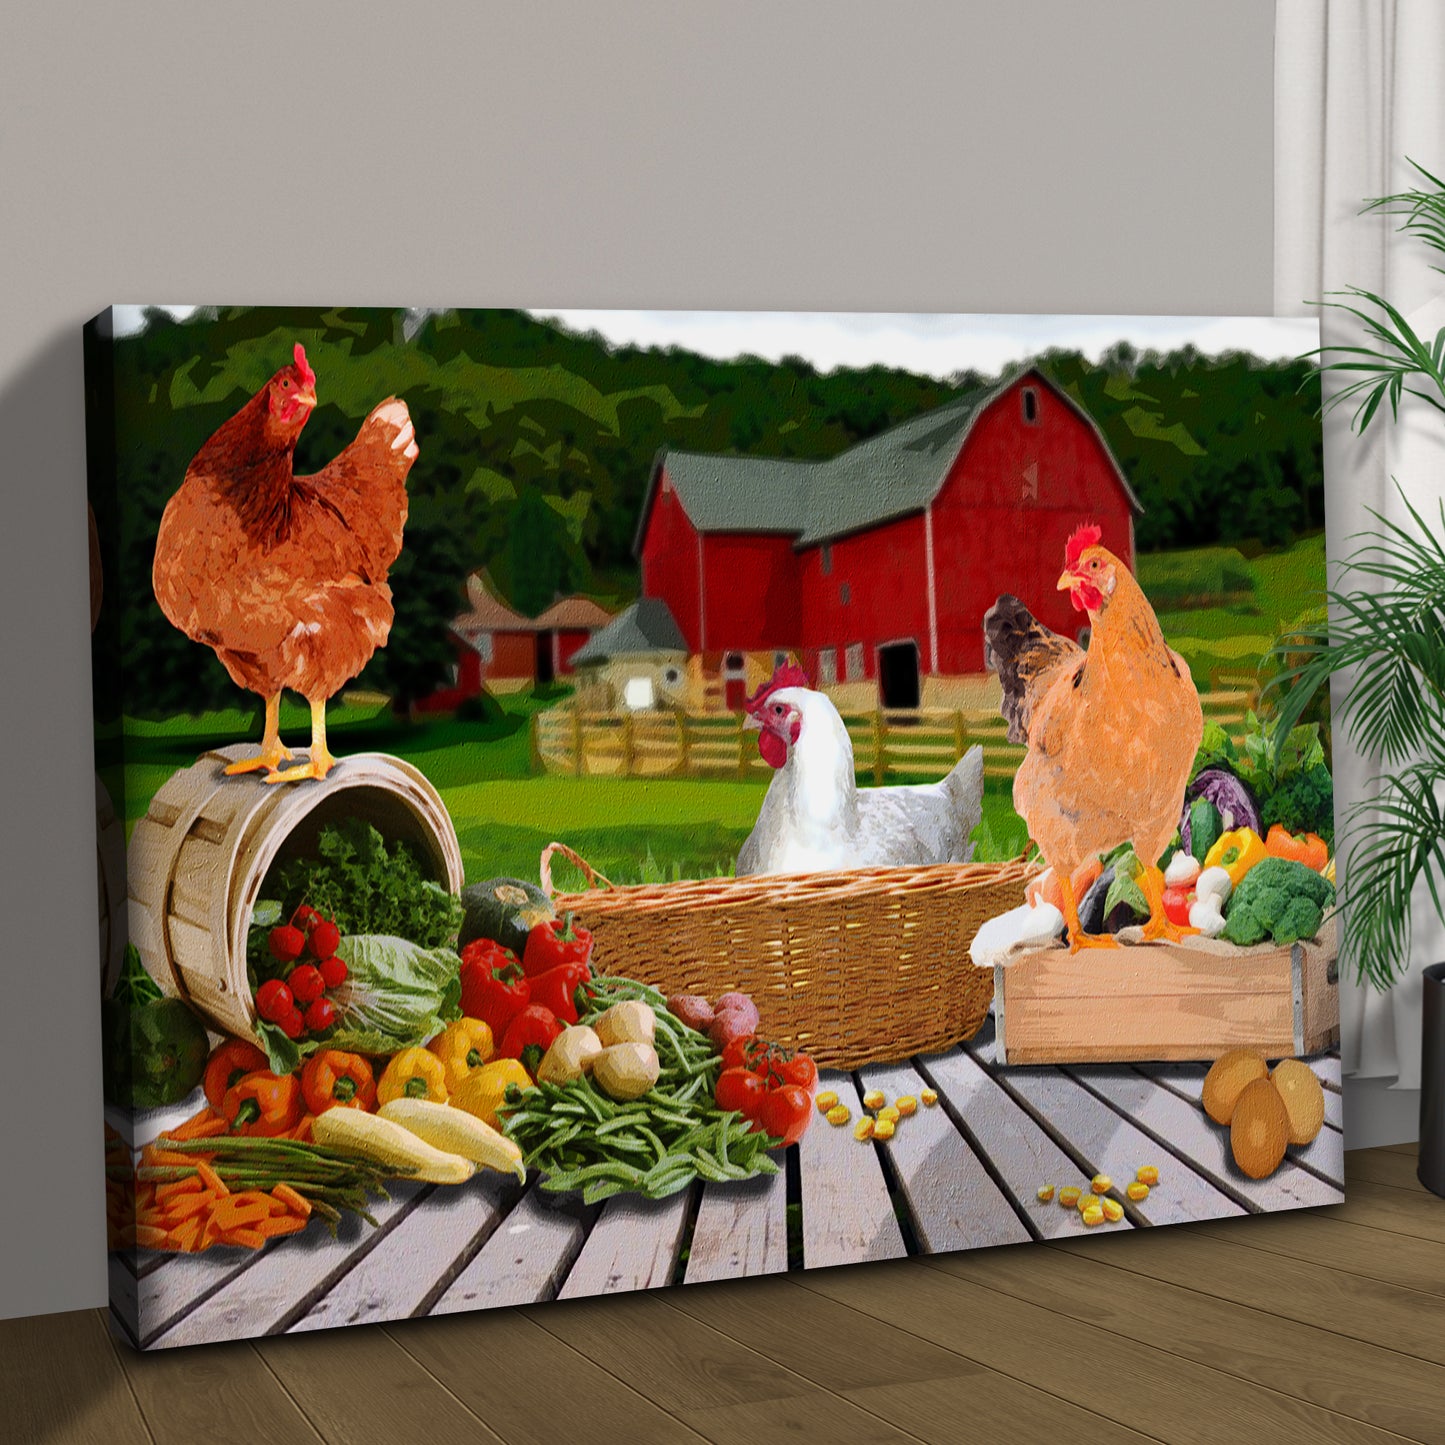 Chicken Farm And Veggies Canvas Wall Art Style 1 - Image by Tailored Canvases